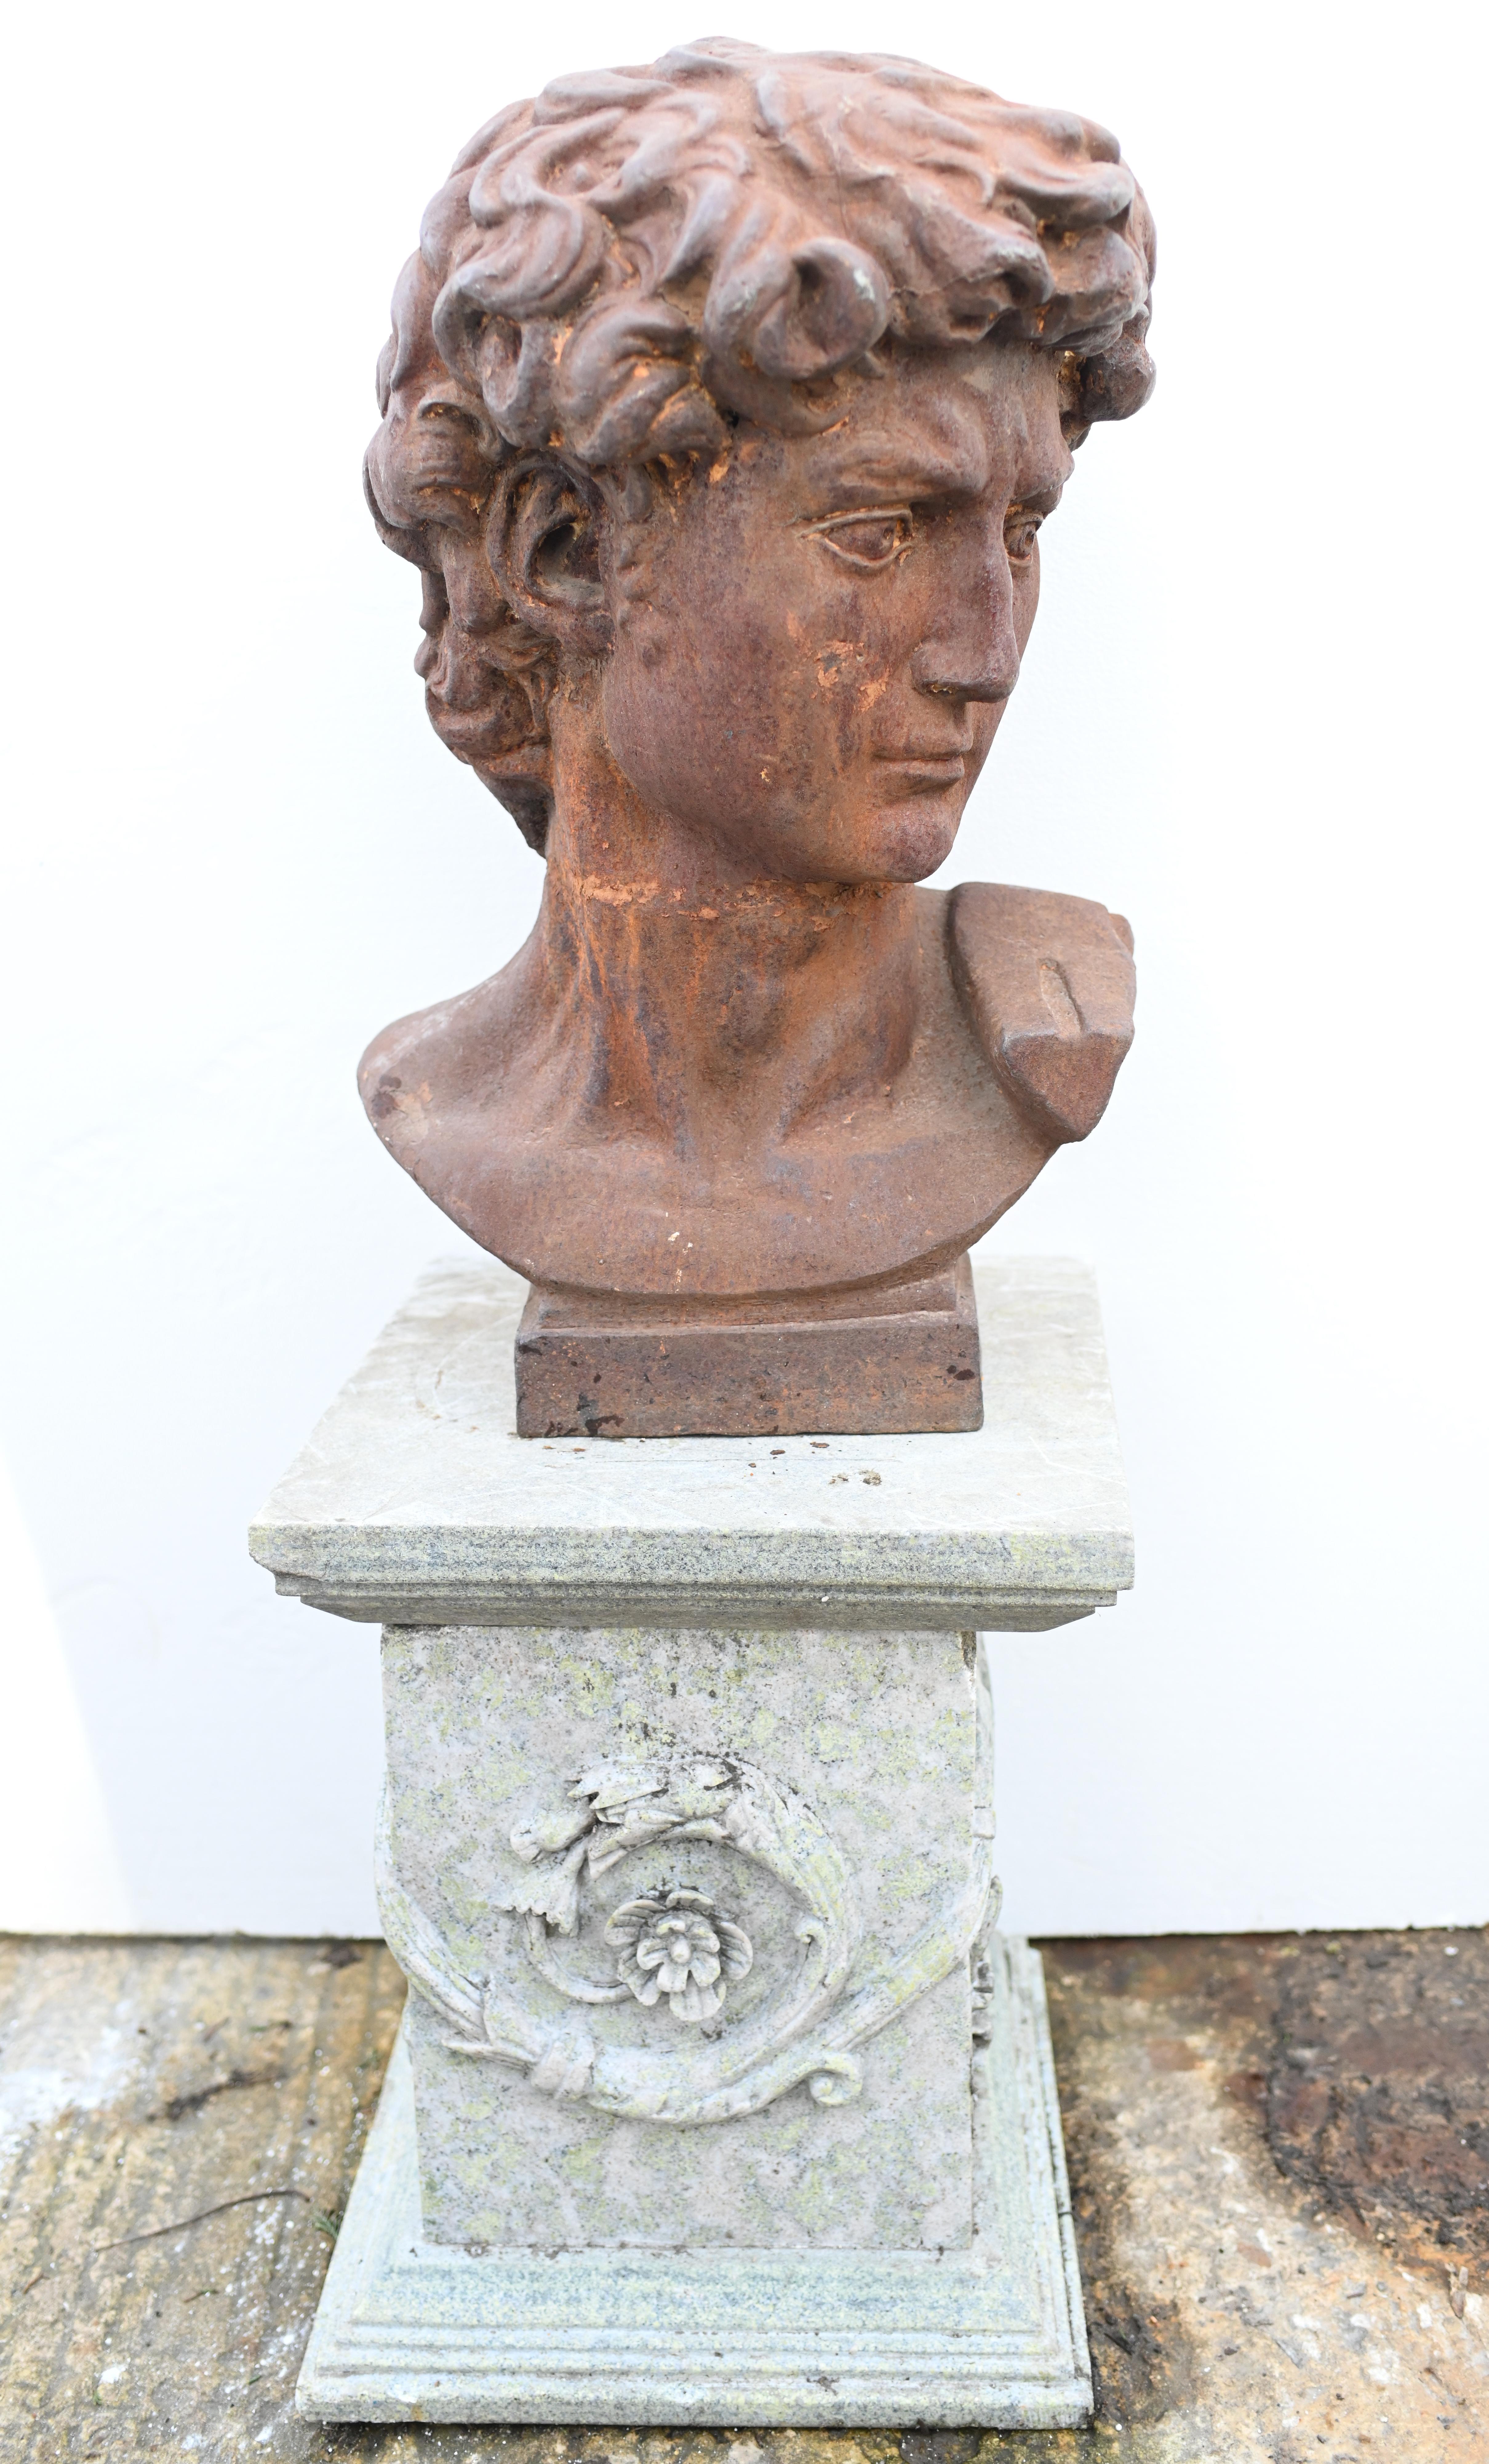 Great bust in cast iron depicting David after the original by Michelangelo
Good size at over two feet tall - 66 CM
We have various pedestal stands to display this, let us know if you are interested
Great architectural salvage piece and we date this